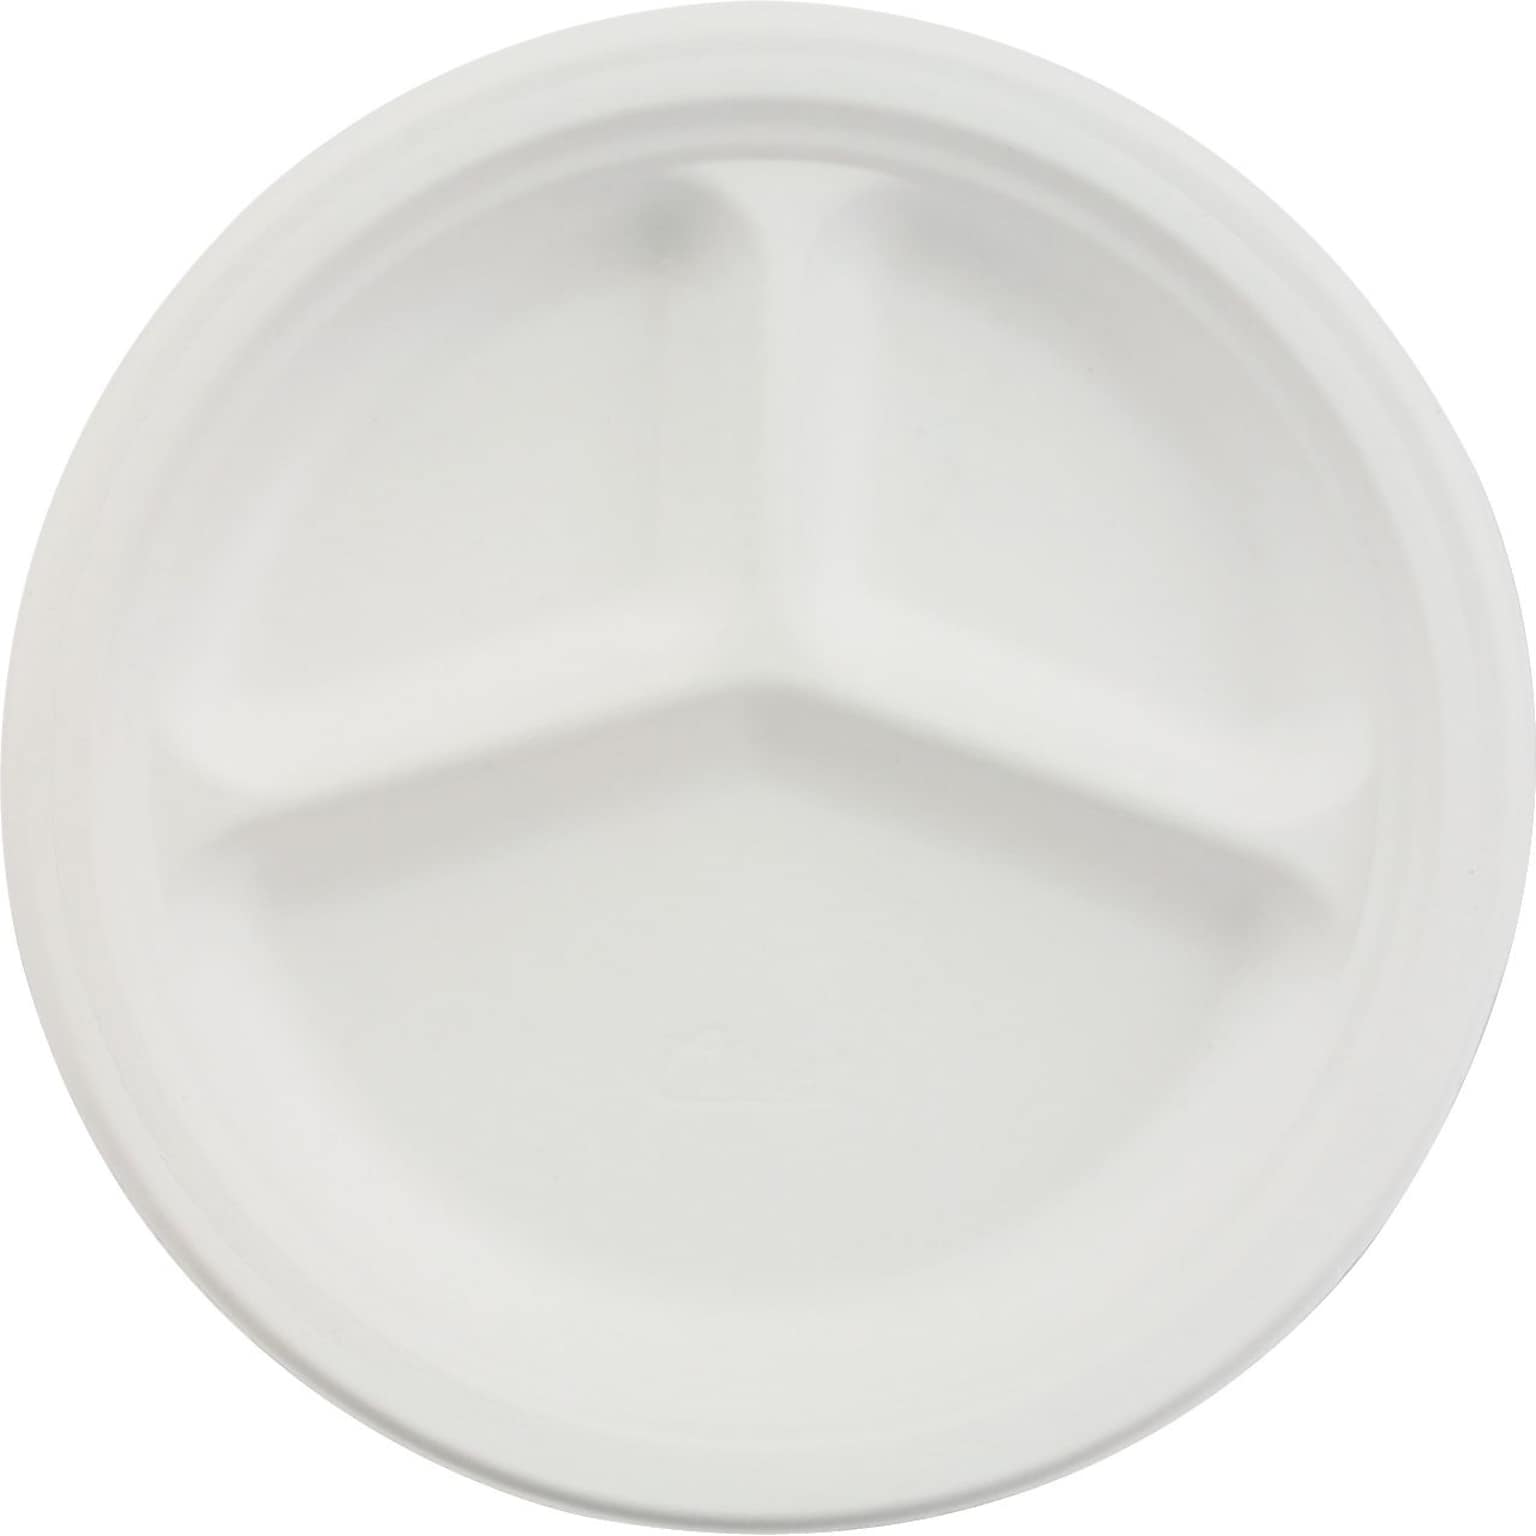 Chinet® Classic Paper Plates; Three Compartments, 10-1/4 Diameter, 500/Case